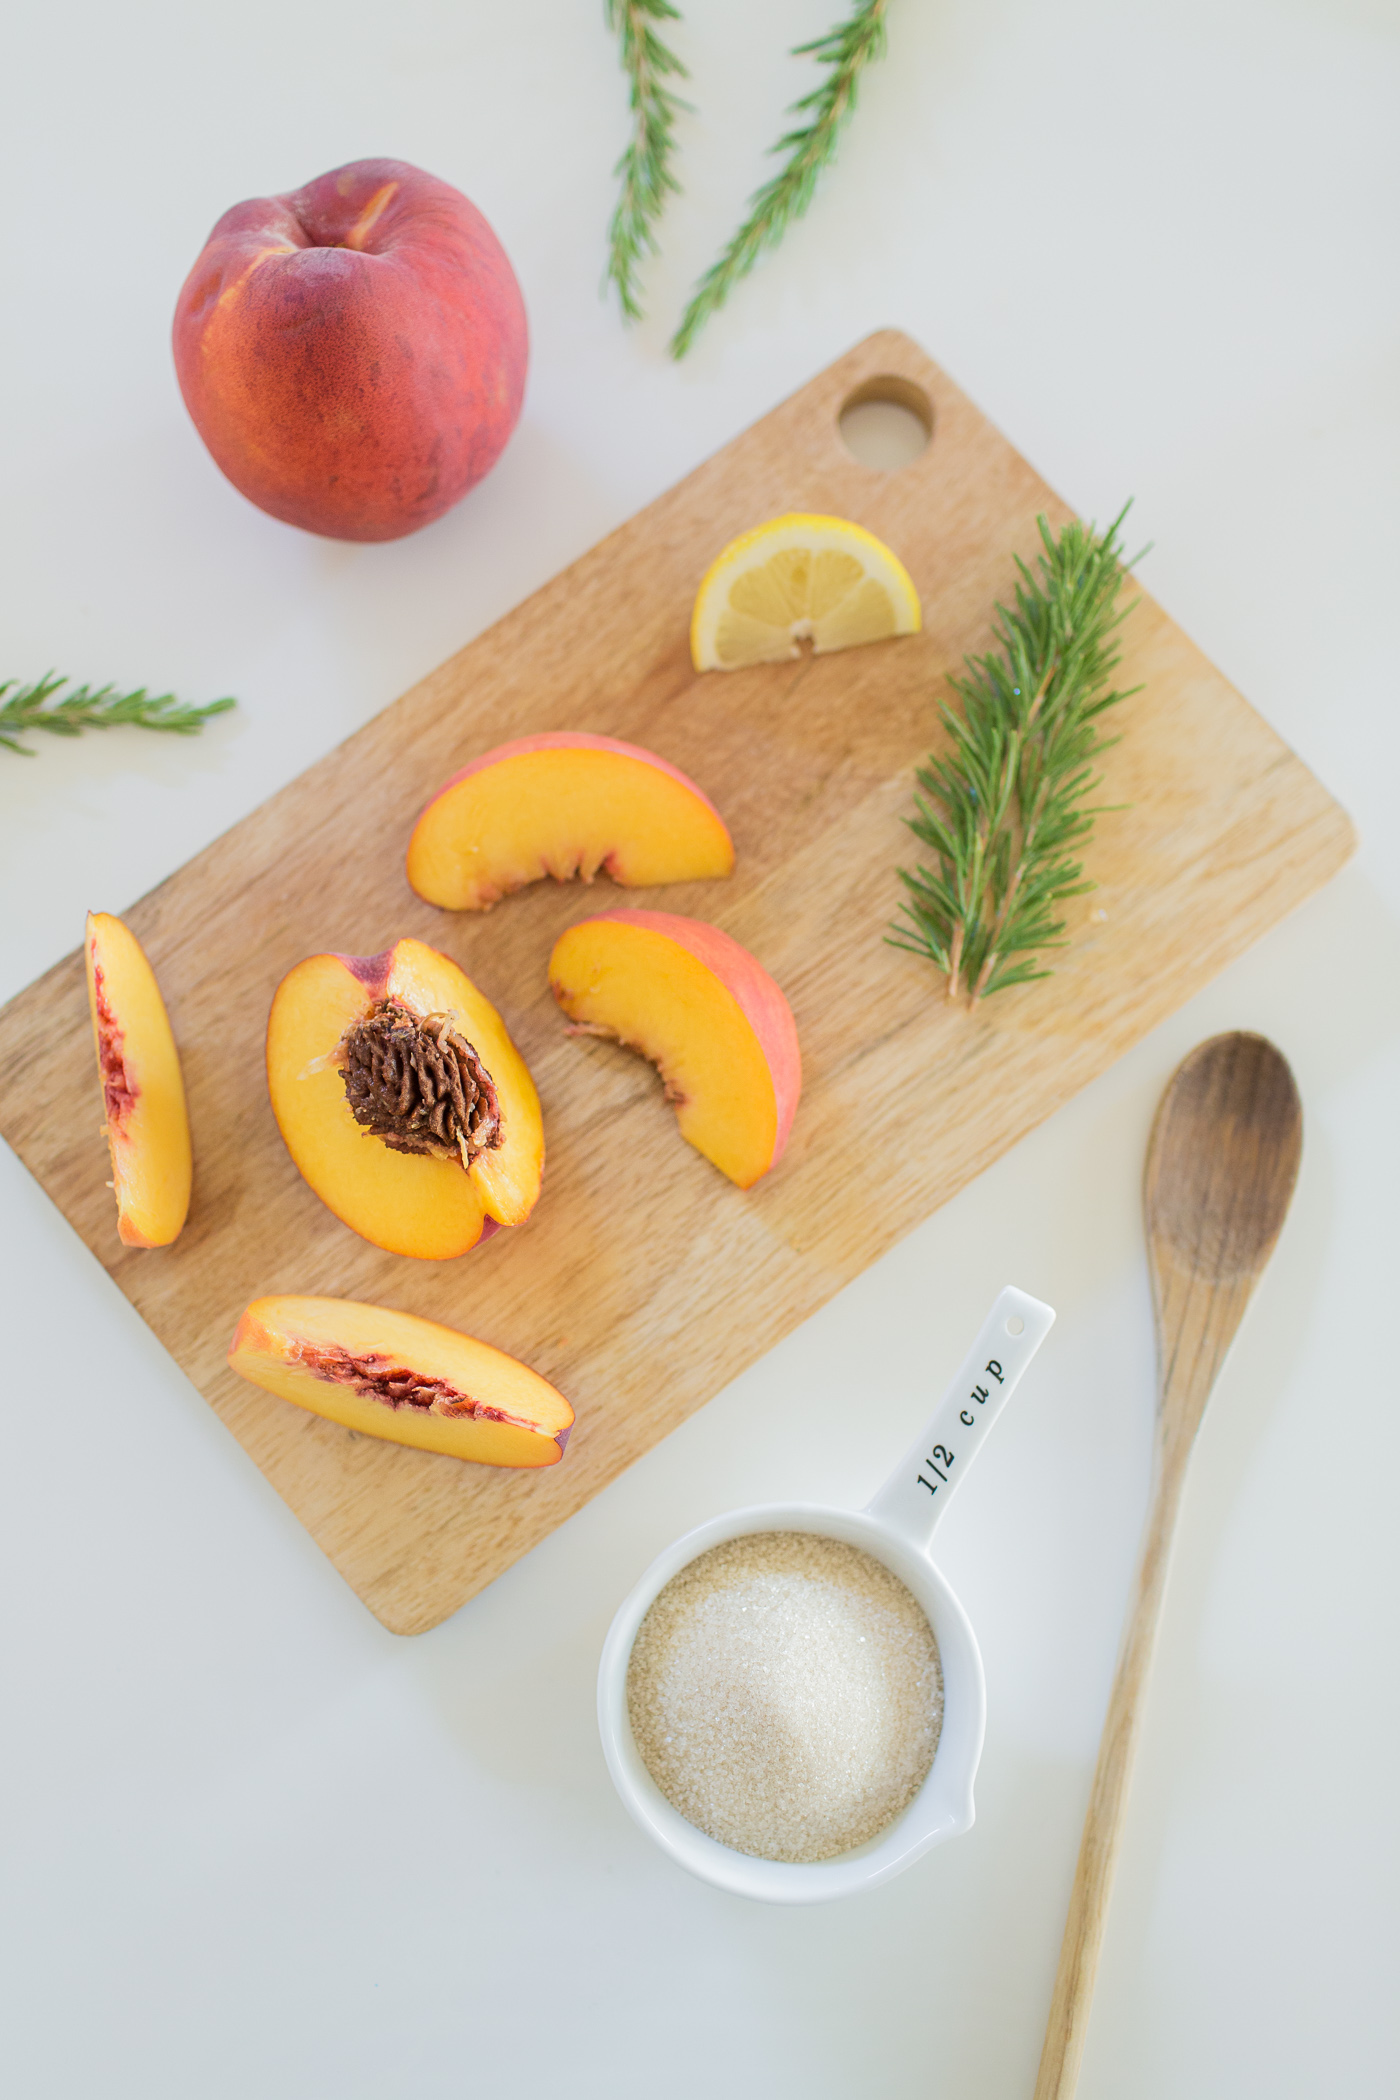 Rosemary Peach Jam. Fresh peaches, rosemary, and lemon are some of the ingredients.